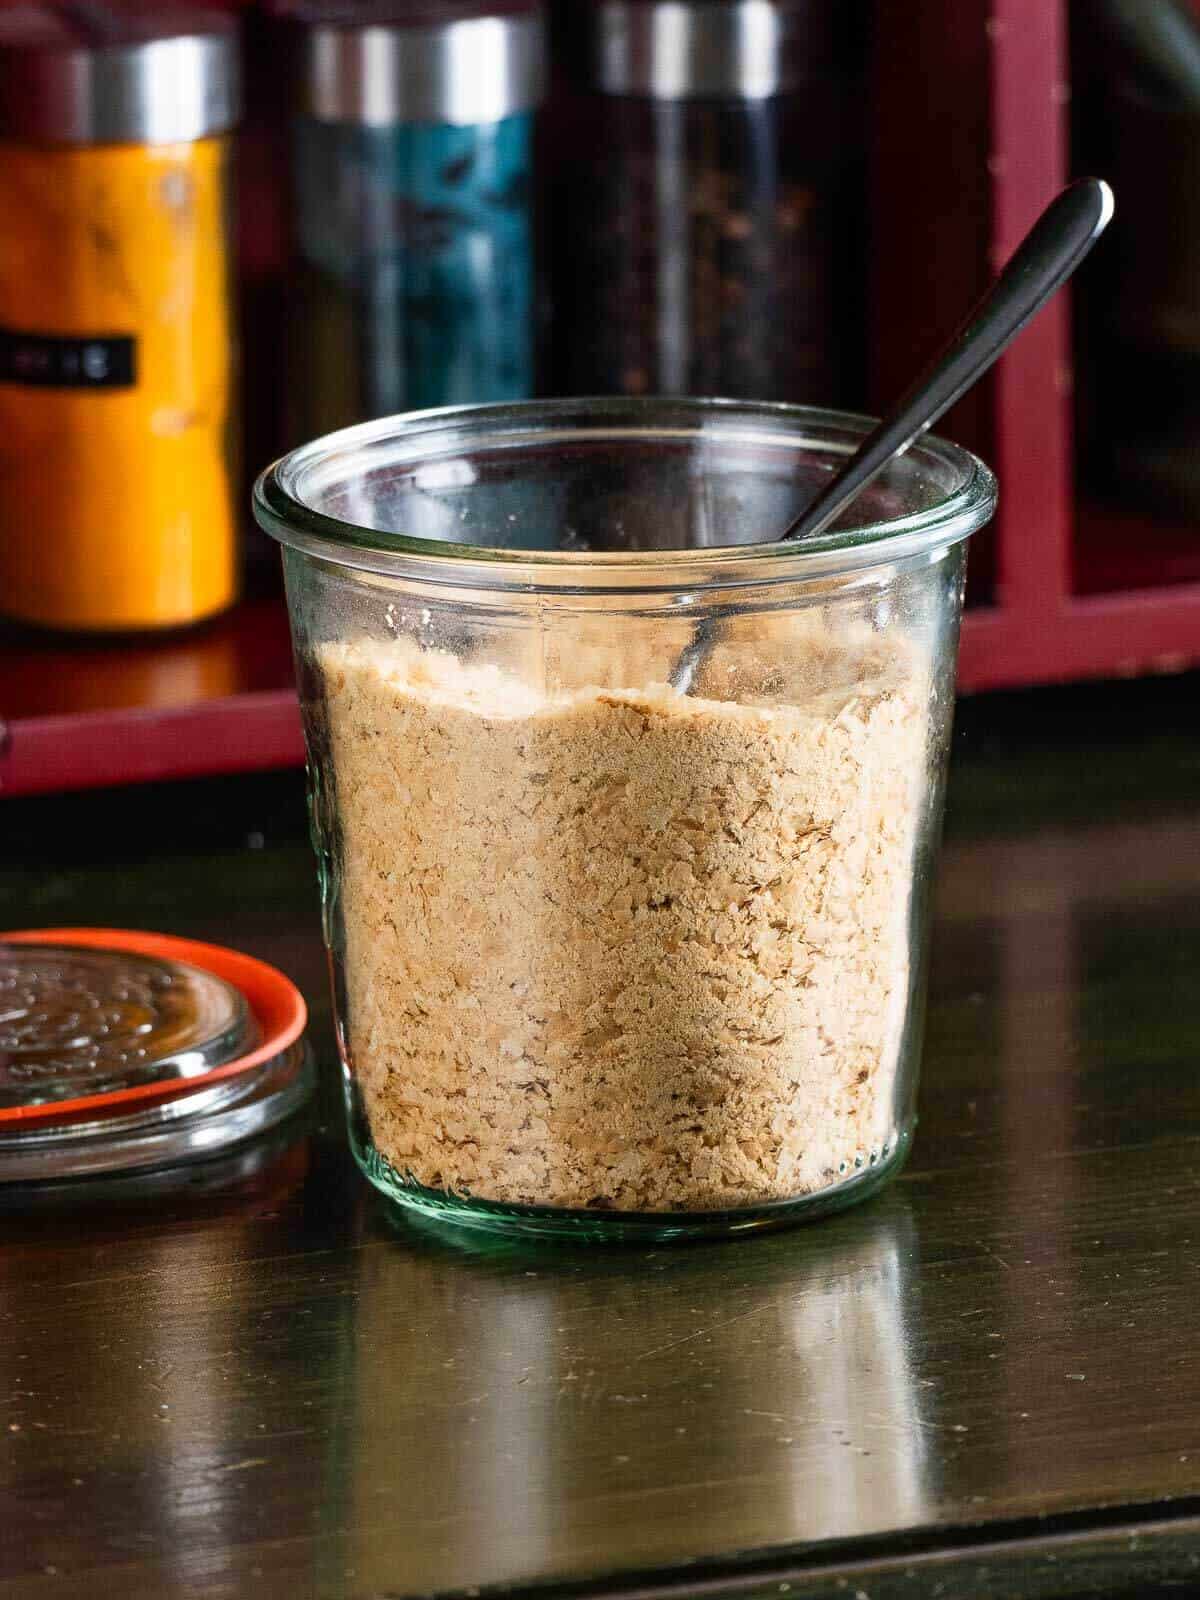 A close-up of a jar filled to the brim with nutritional yeast flakes, providing a detailed view of the texture and natural color of the flakes.